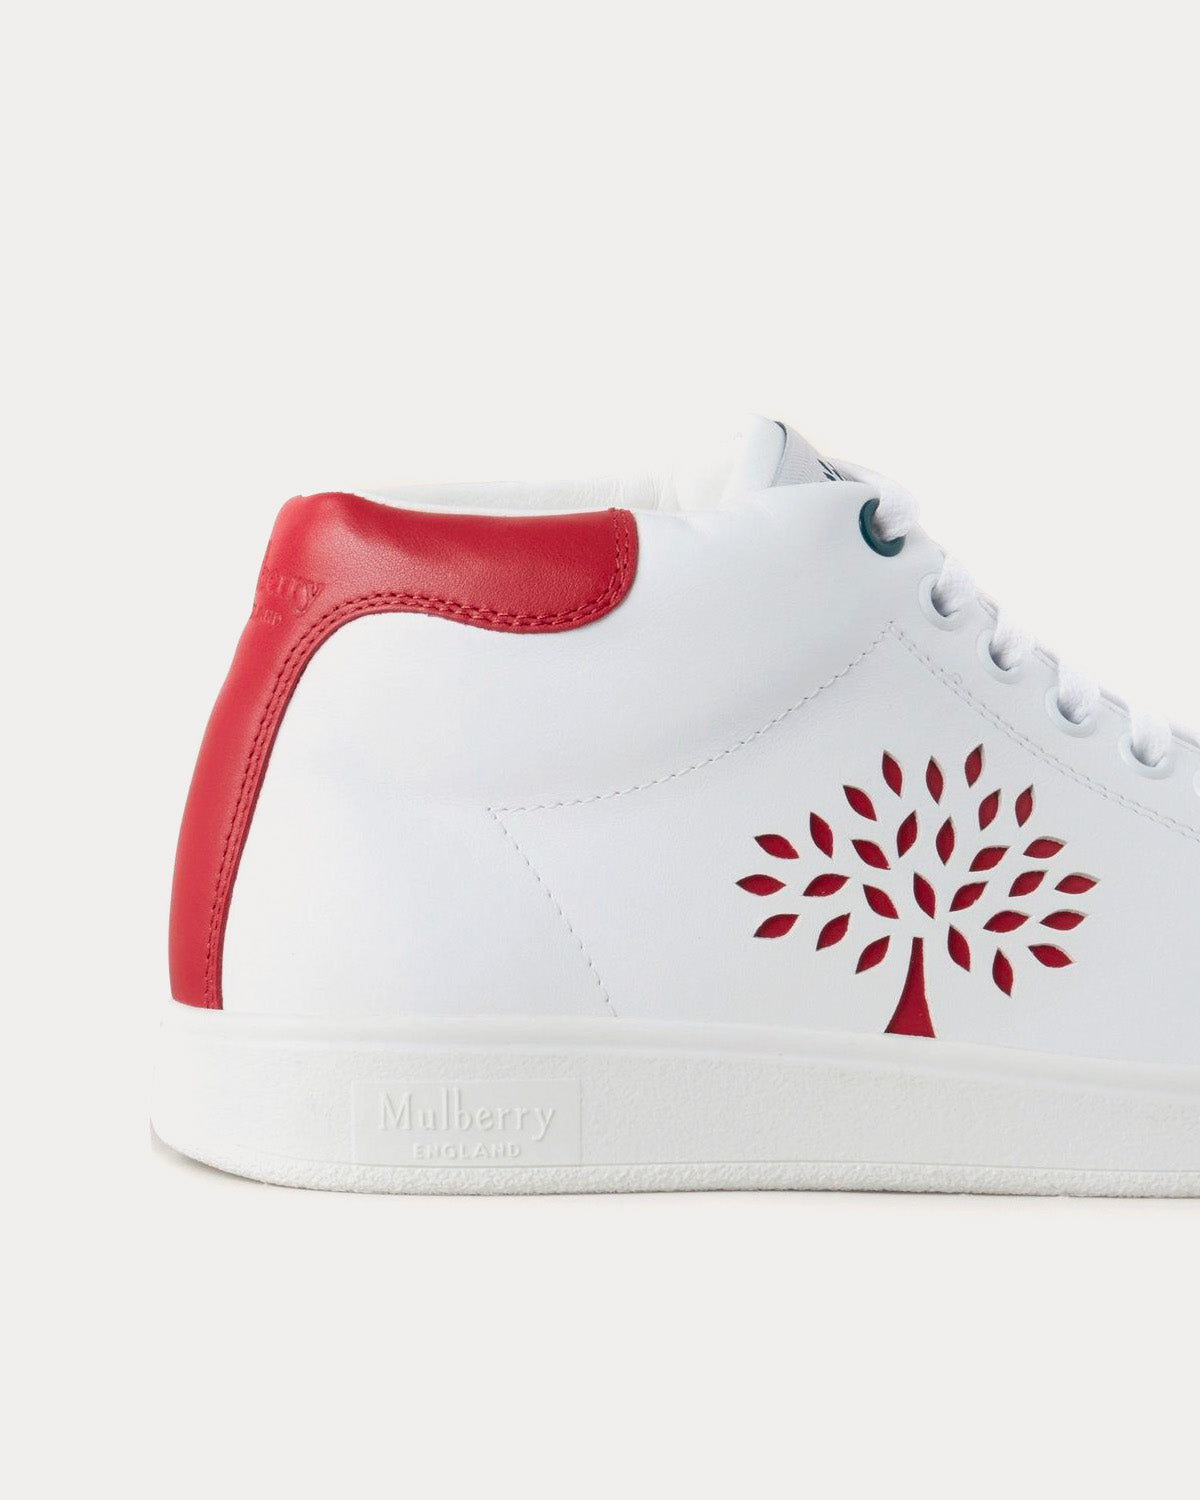 Mulberry - Tree Tennis Leather Lancaster Red High Top Sneakers